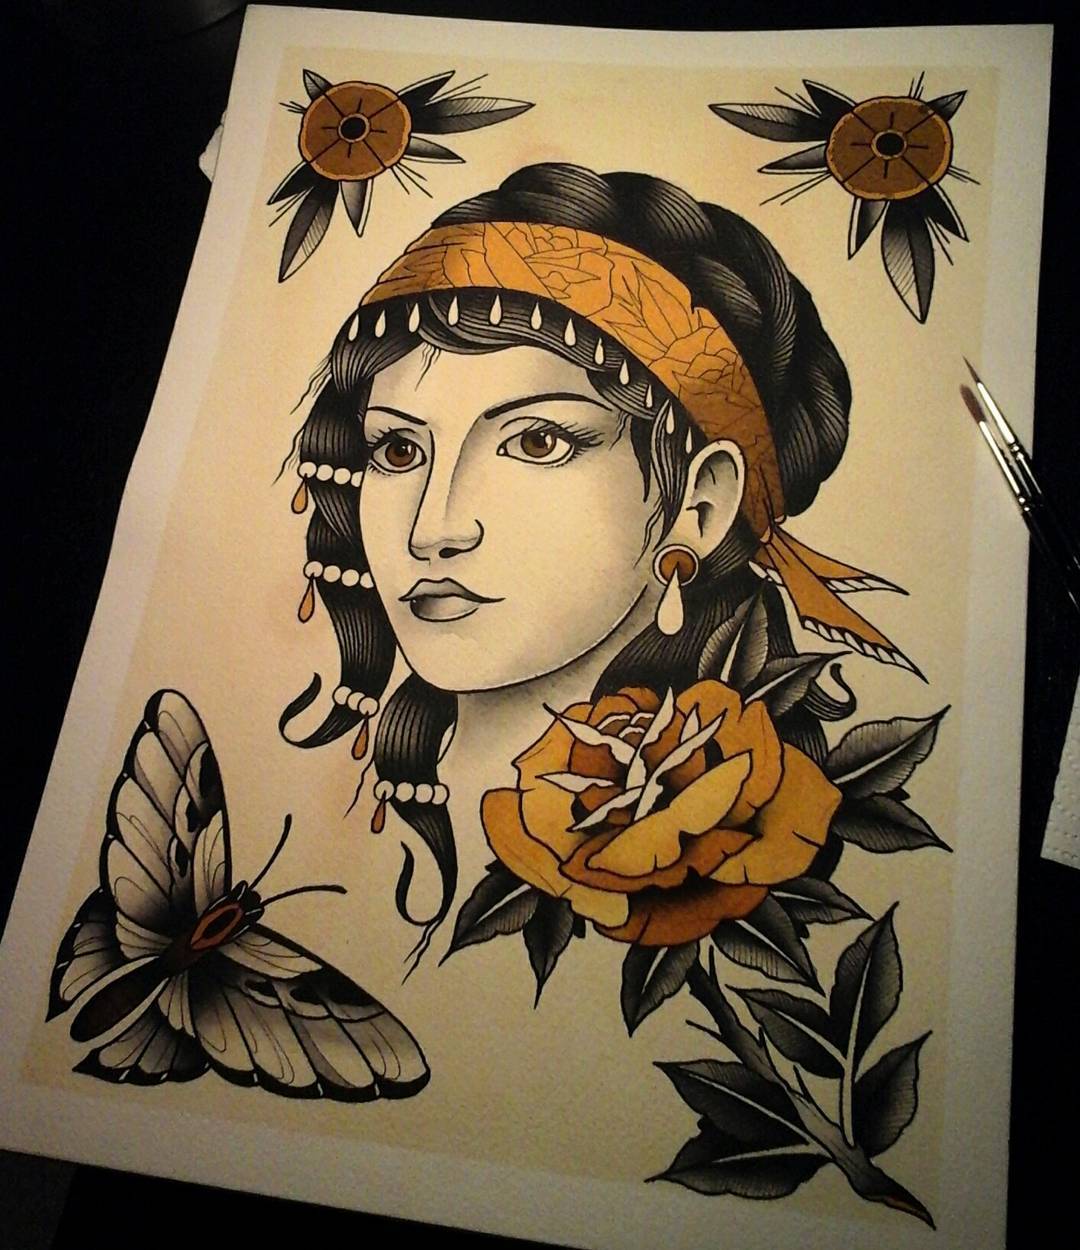 Finished this lil gypsygirl....available for tattooing......gute Nacht zusammen